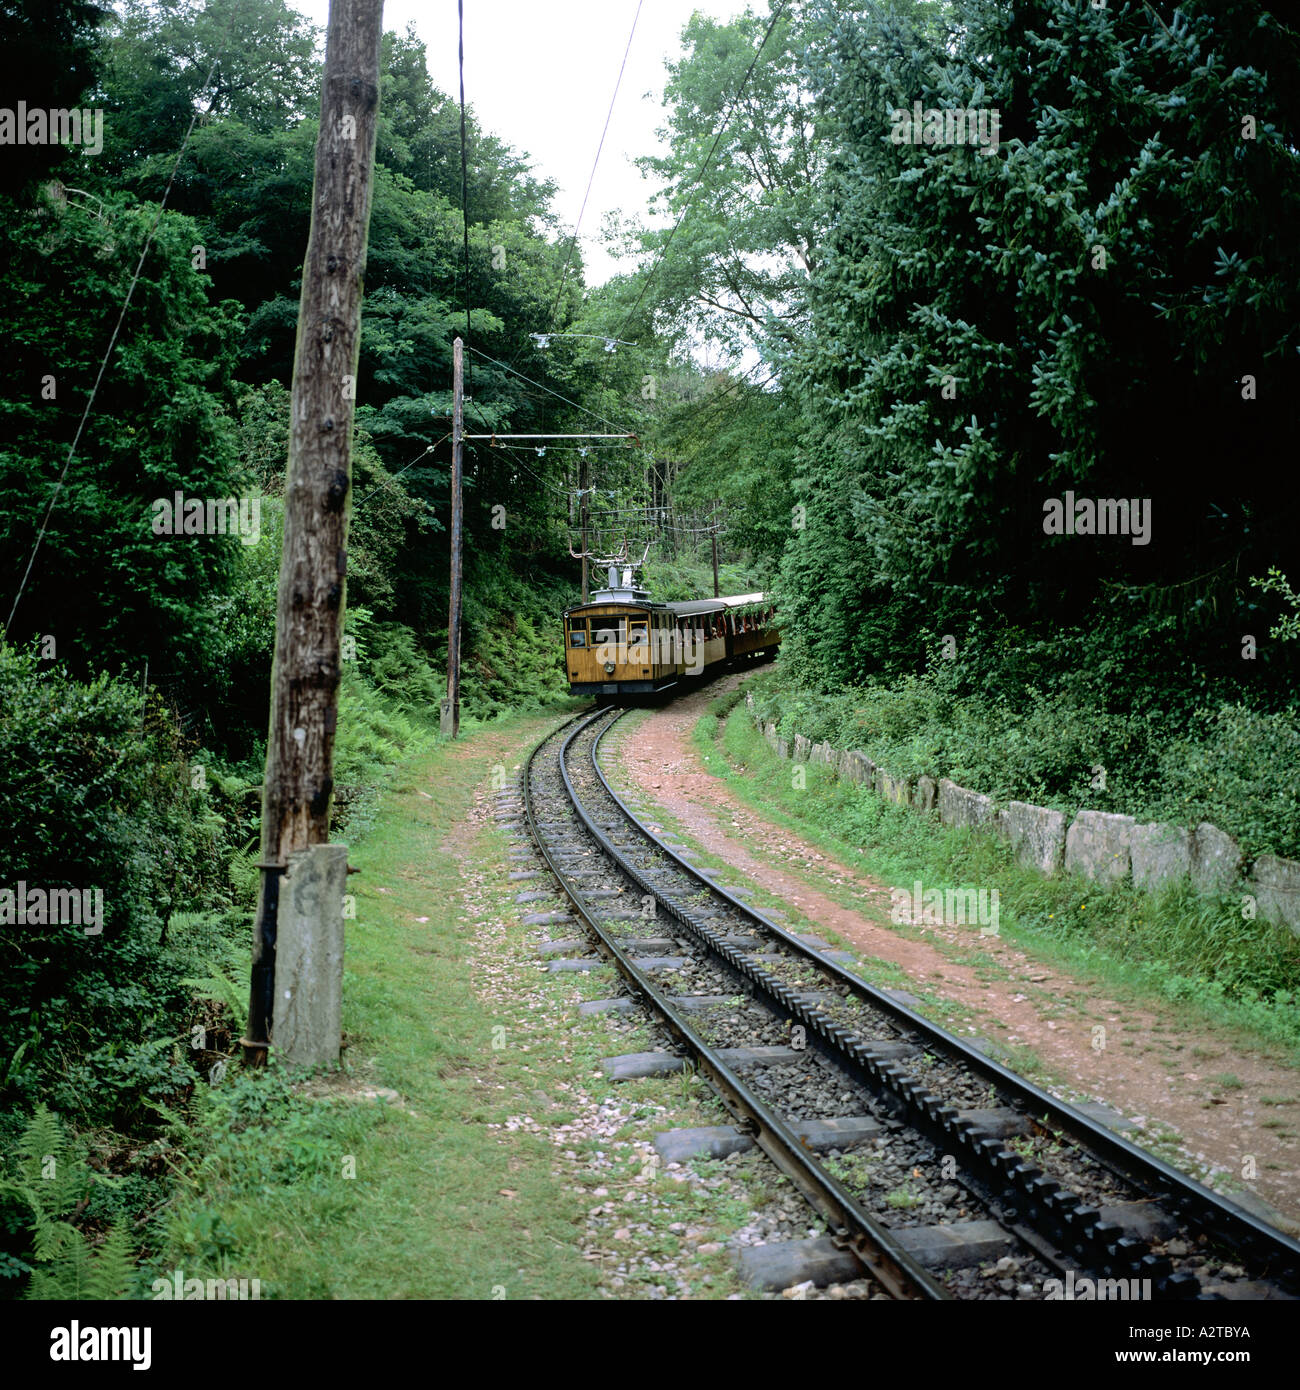 LA RHUNE RACK RAILWAY WOODEN TRAIN BUILT 1914 IN FOREST BASQUE COUNTRY FRANCE EUROPE Stock Photo